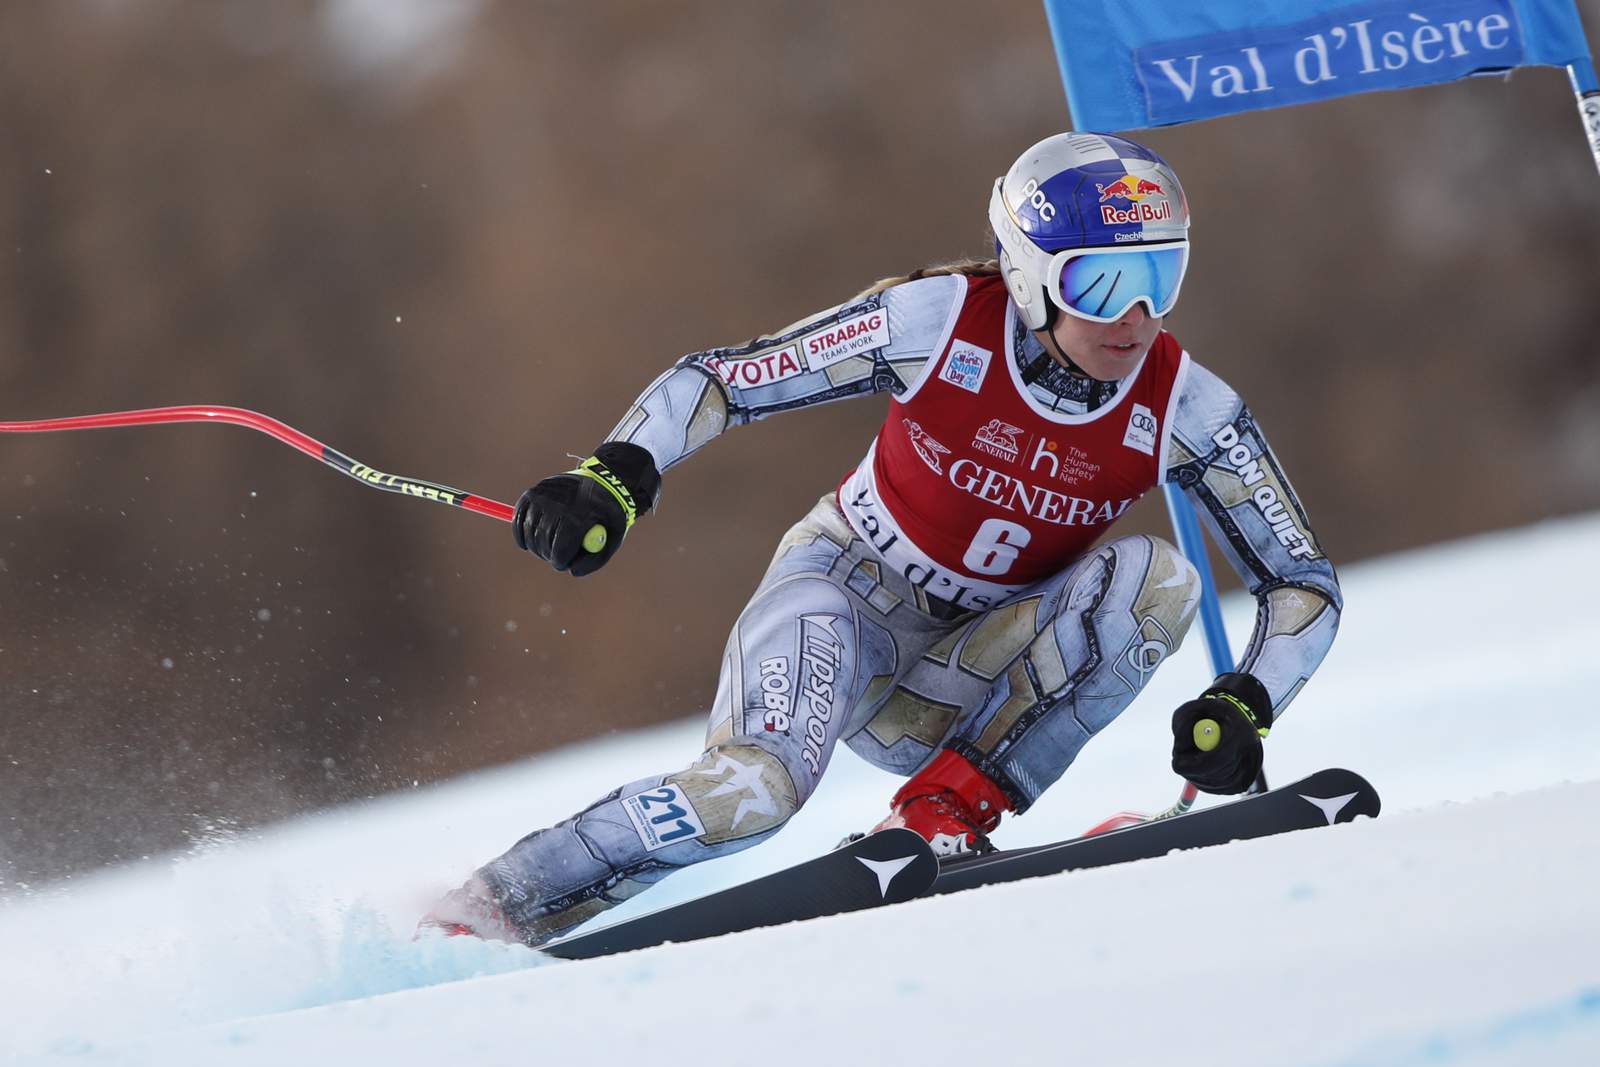 Ledecka edges Suter to add World Cup win to Olympic title